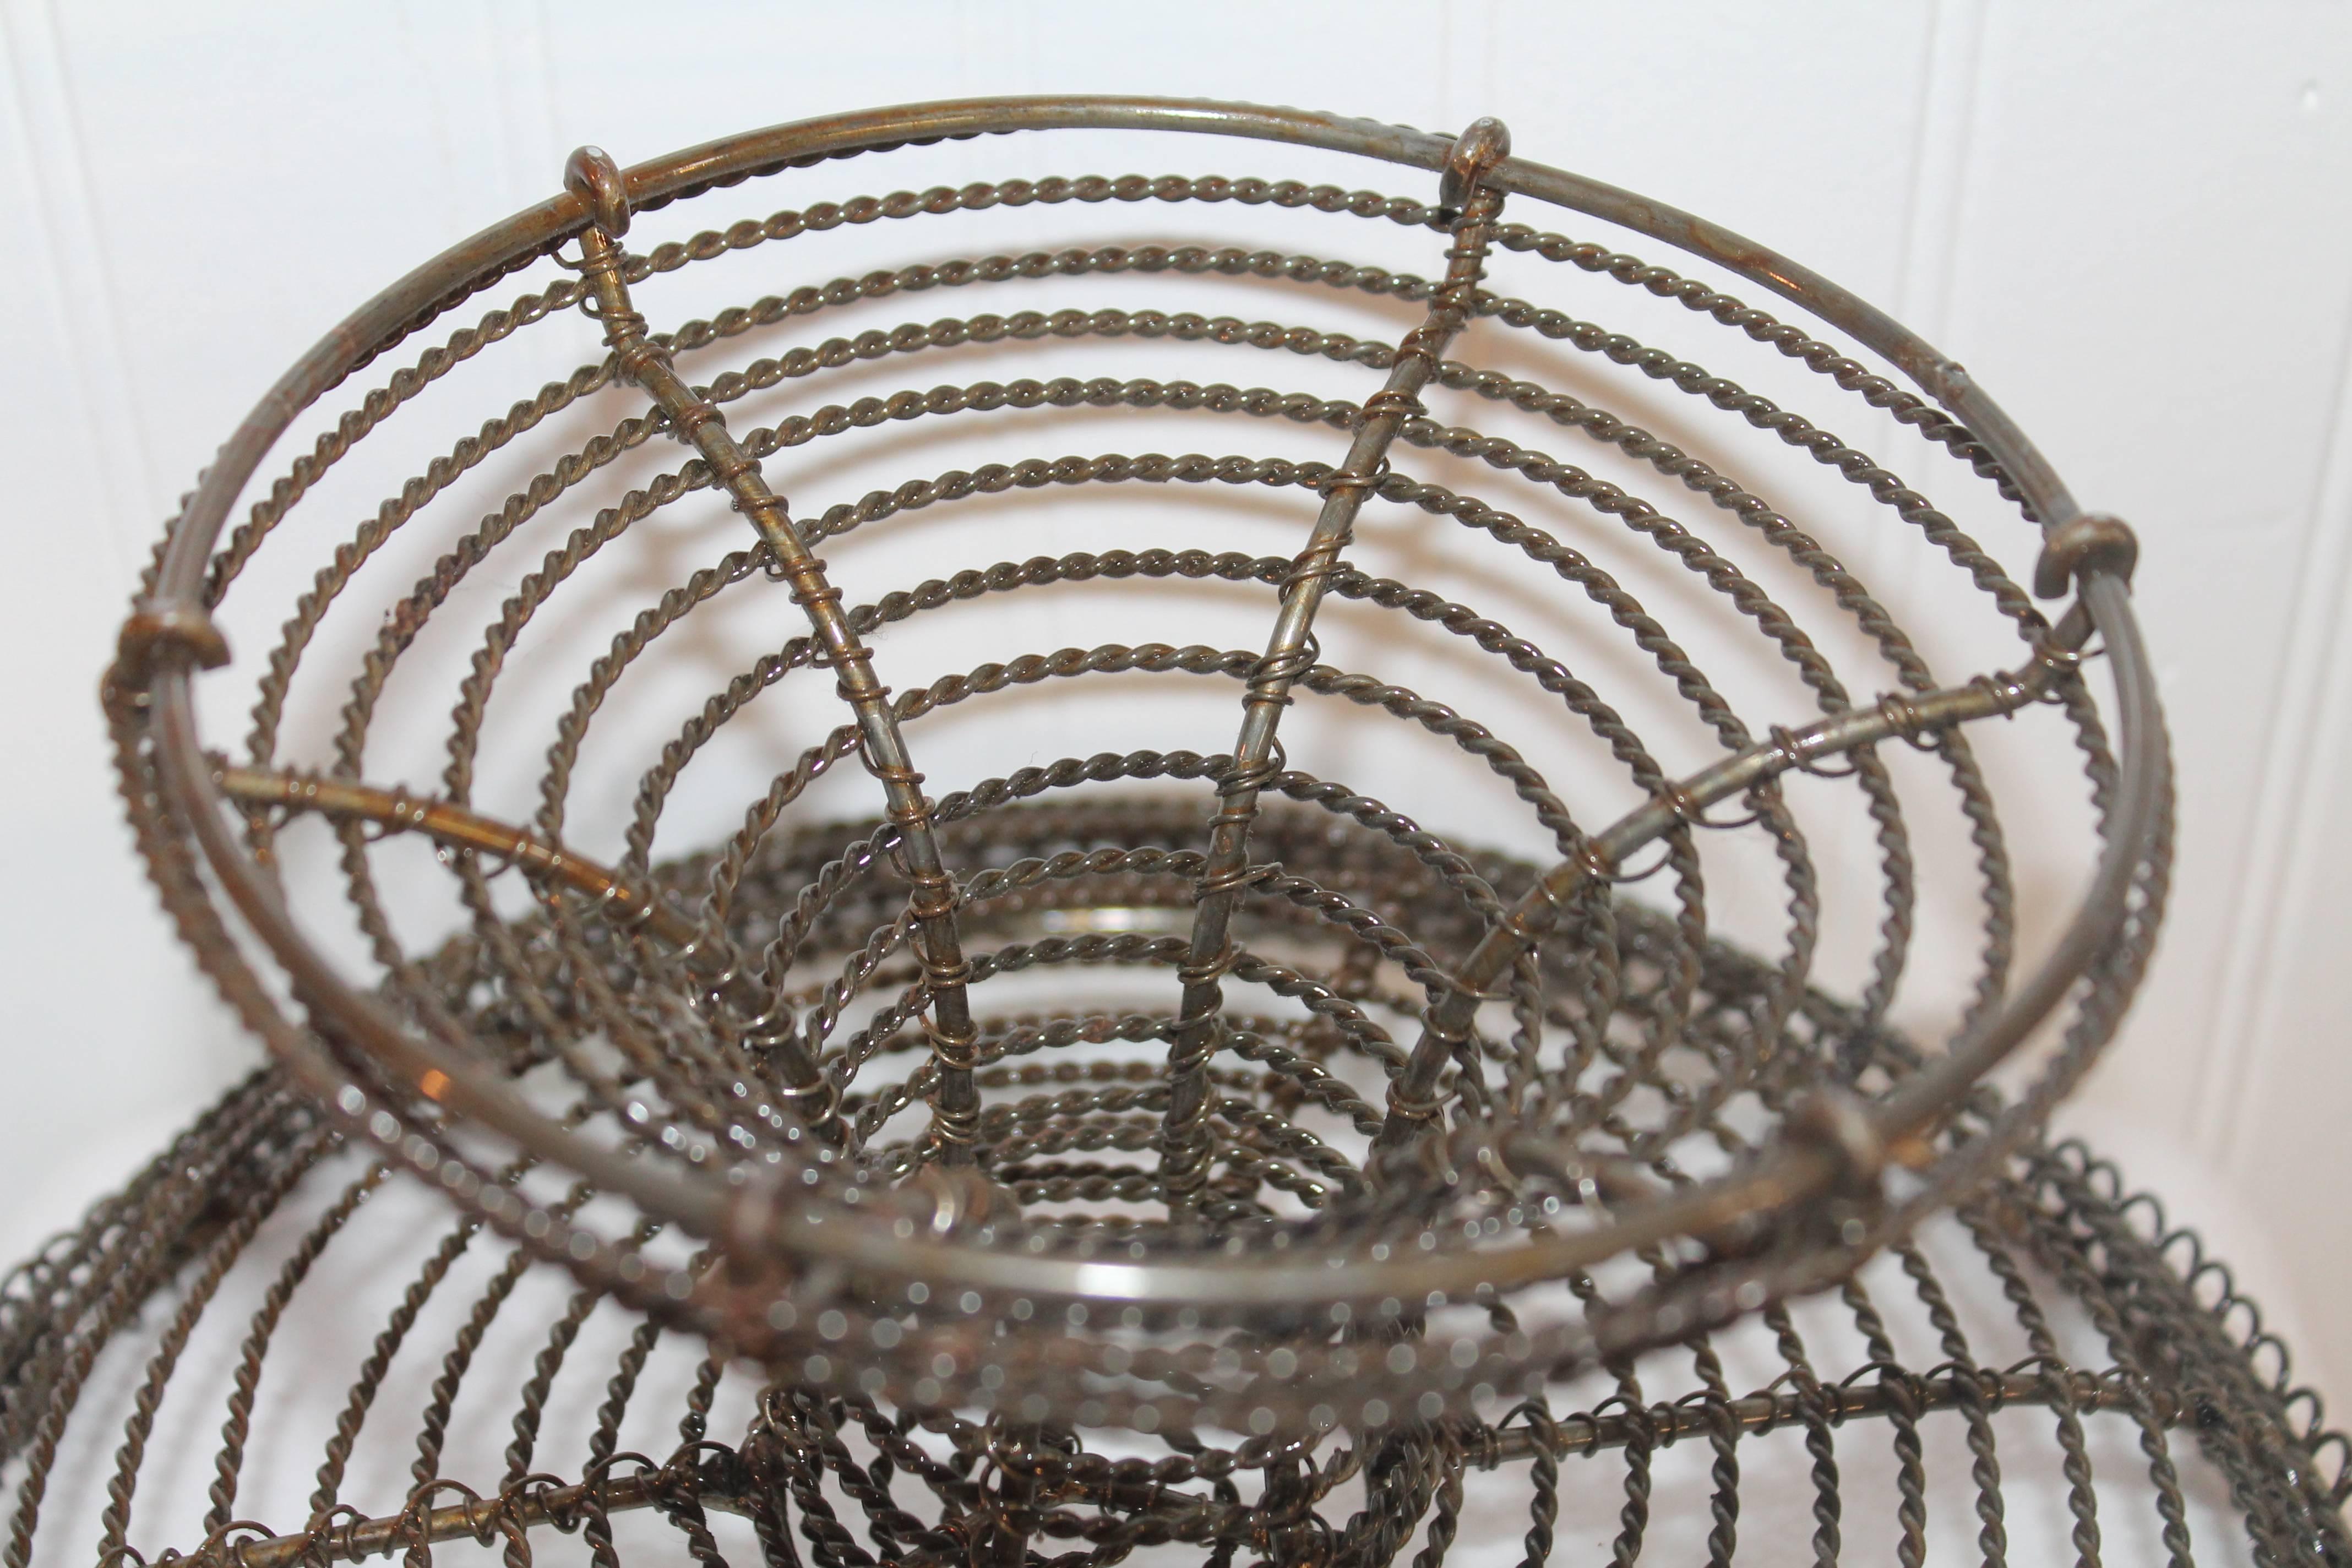 Metal Stone Fruit Apples in 19th Century Wire Basket